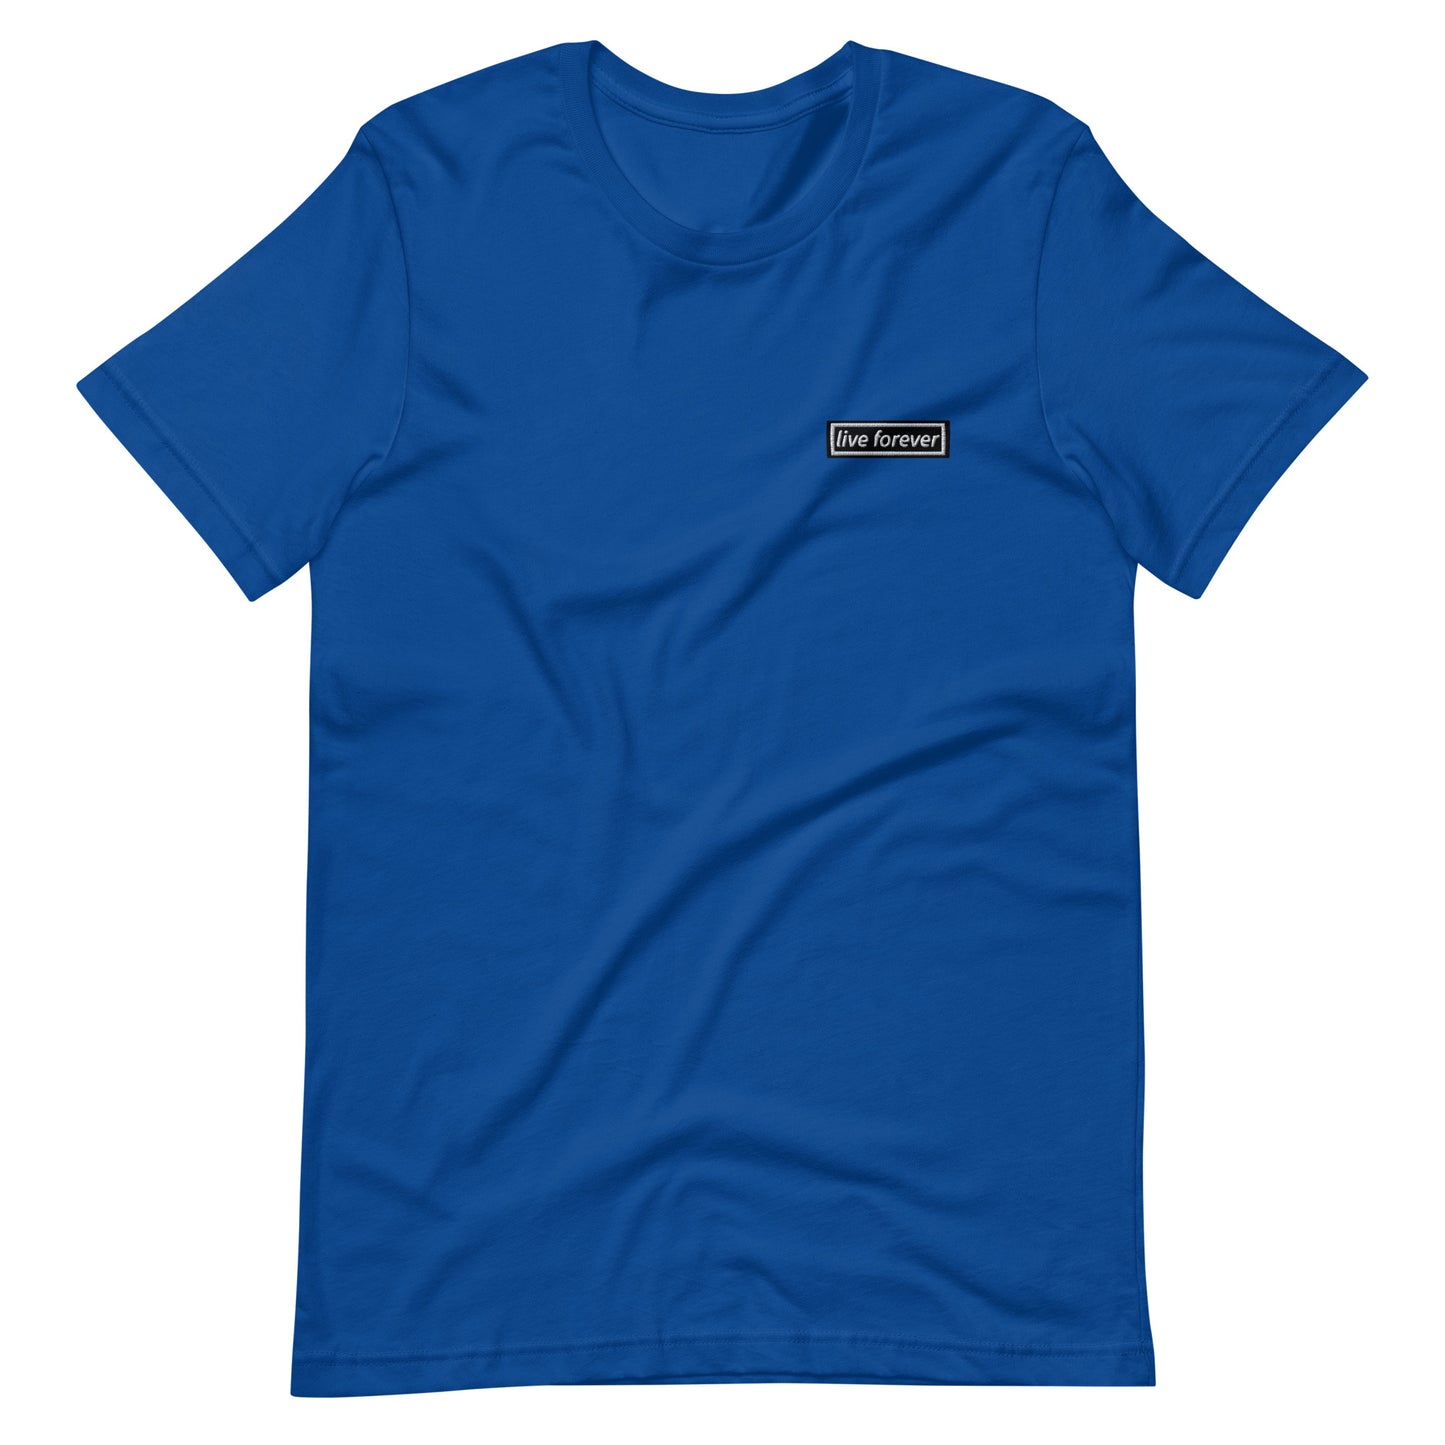 Oasis Live Forever Embroidered Short-Sleeve Unisex T-Shirt